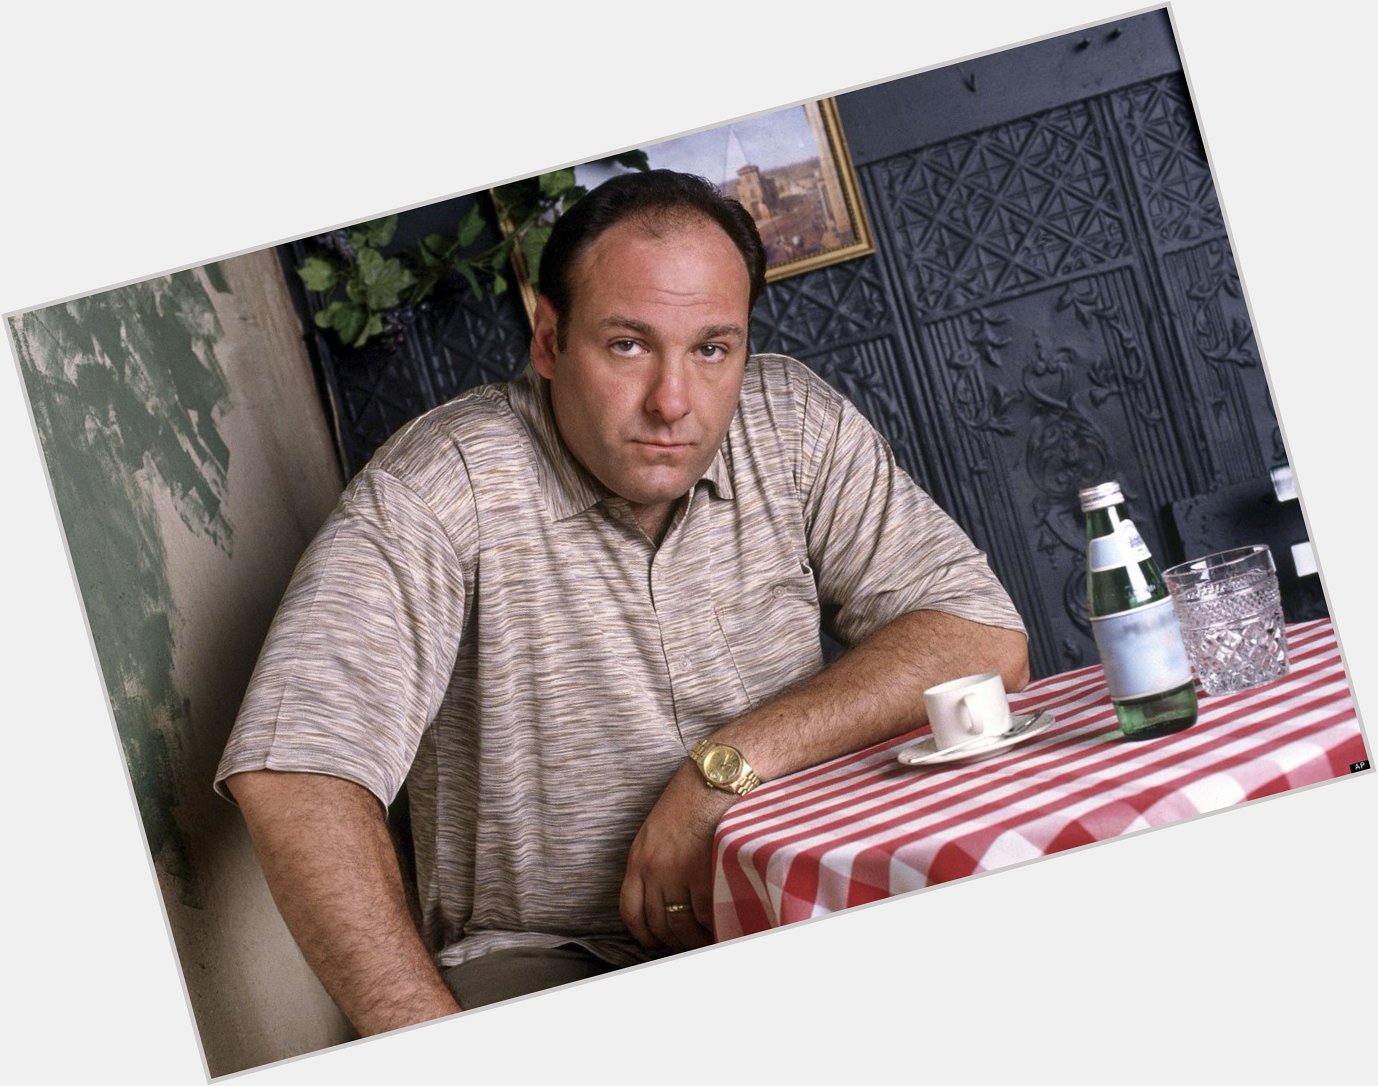 Happy Birthday to James Gandolfini, who would have turned 56 today! 